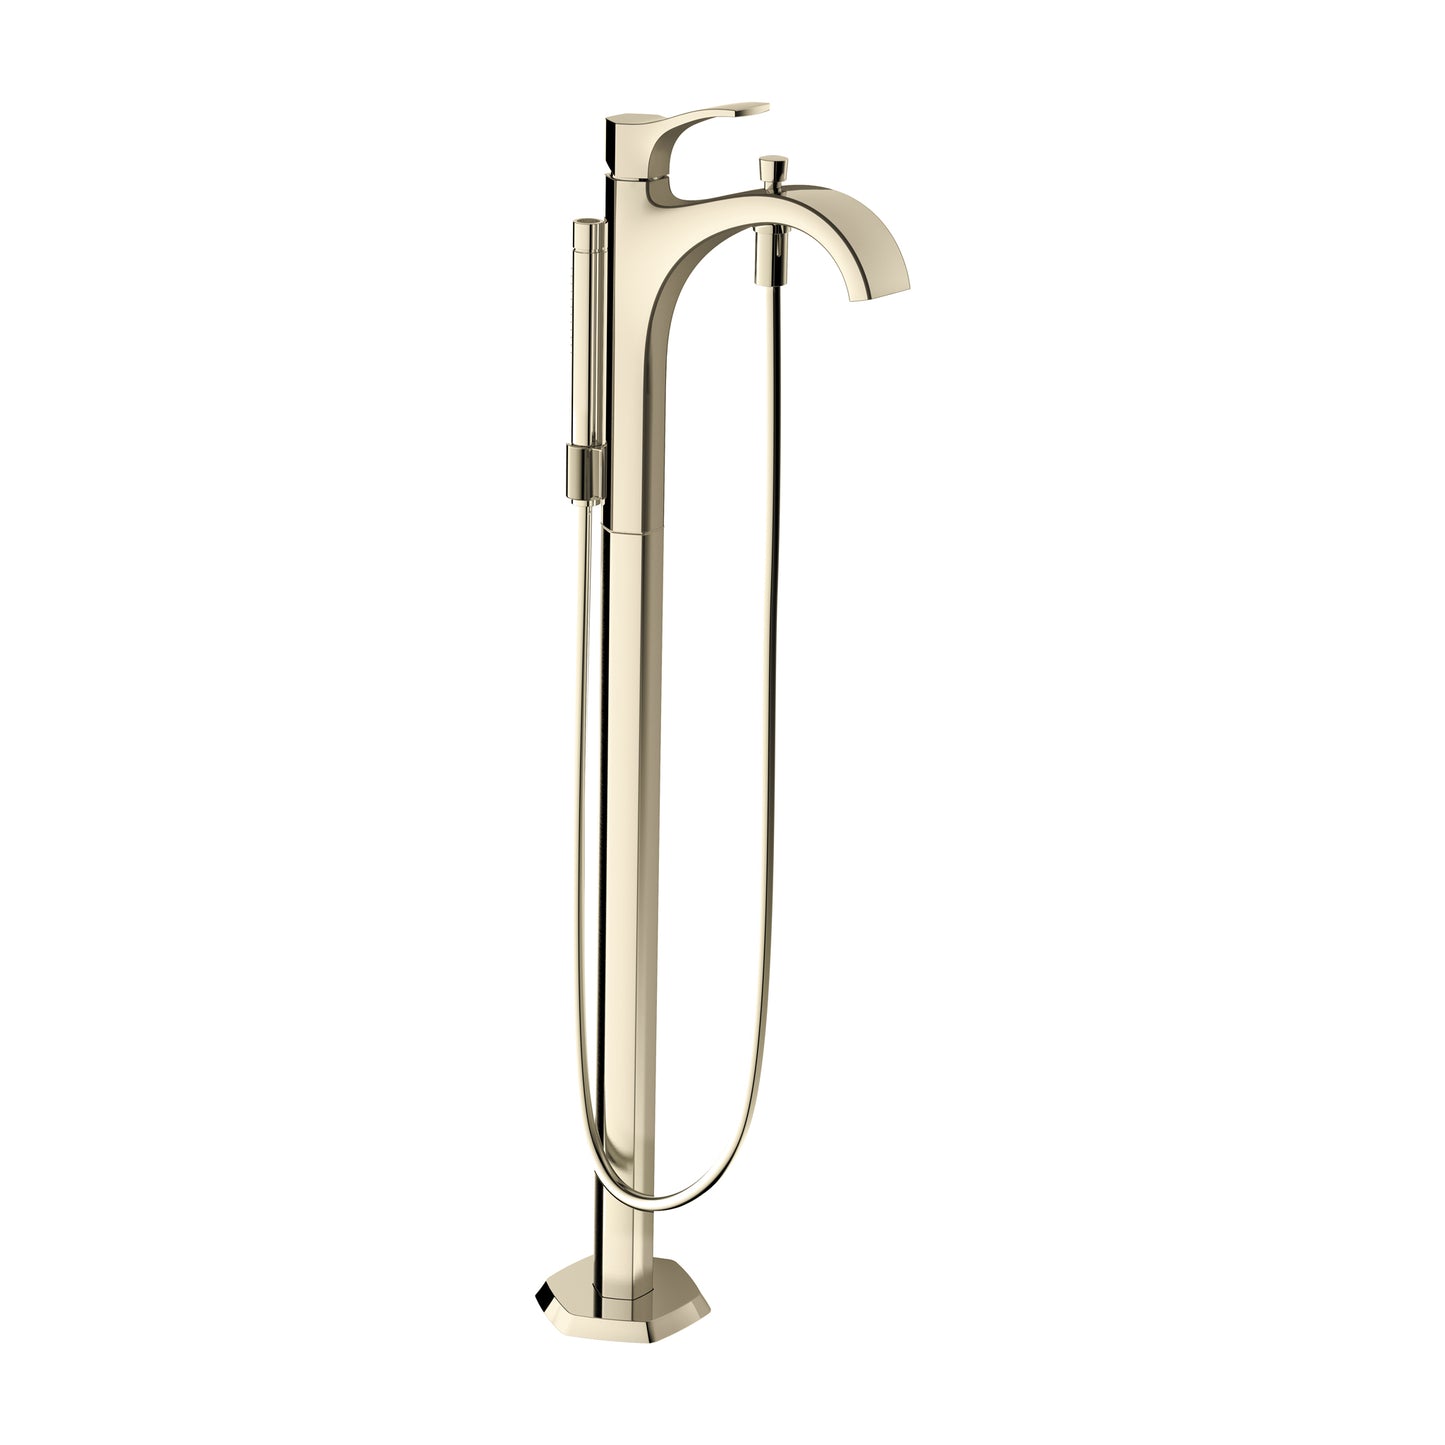 HANSGROHE 04818830 Polished Nickel Locarno Transitional Tub Filler 1.75 GPM